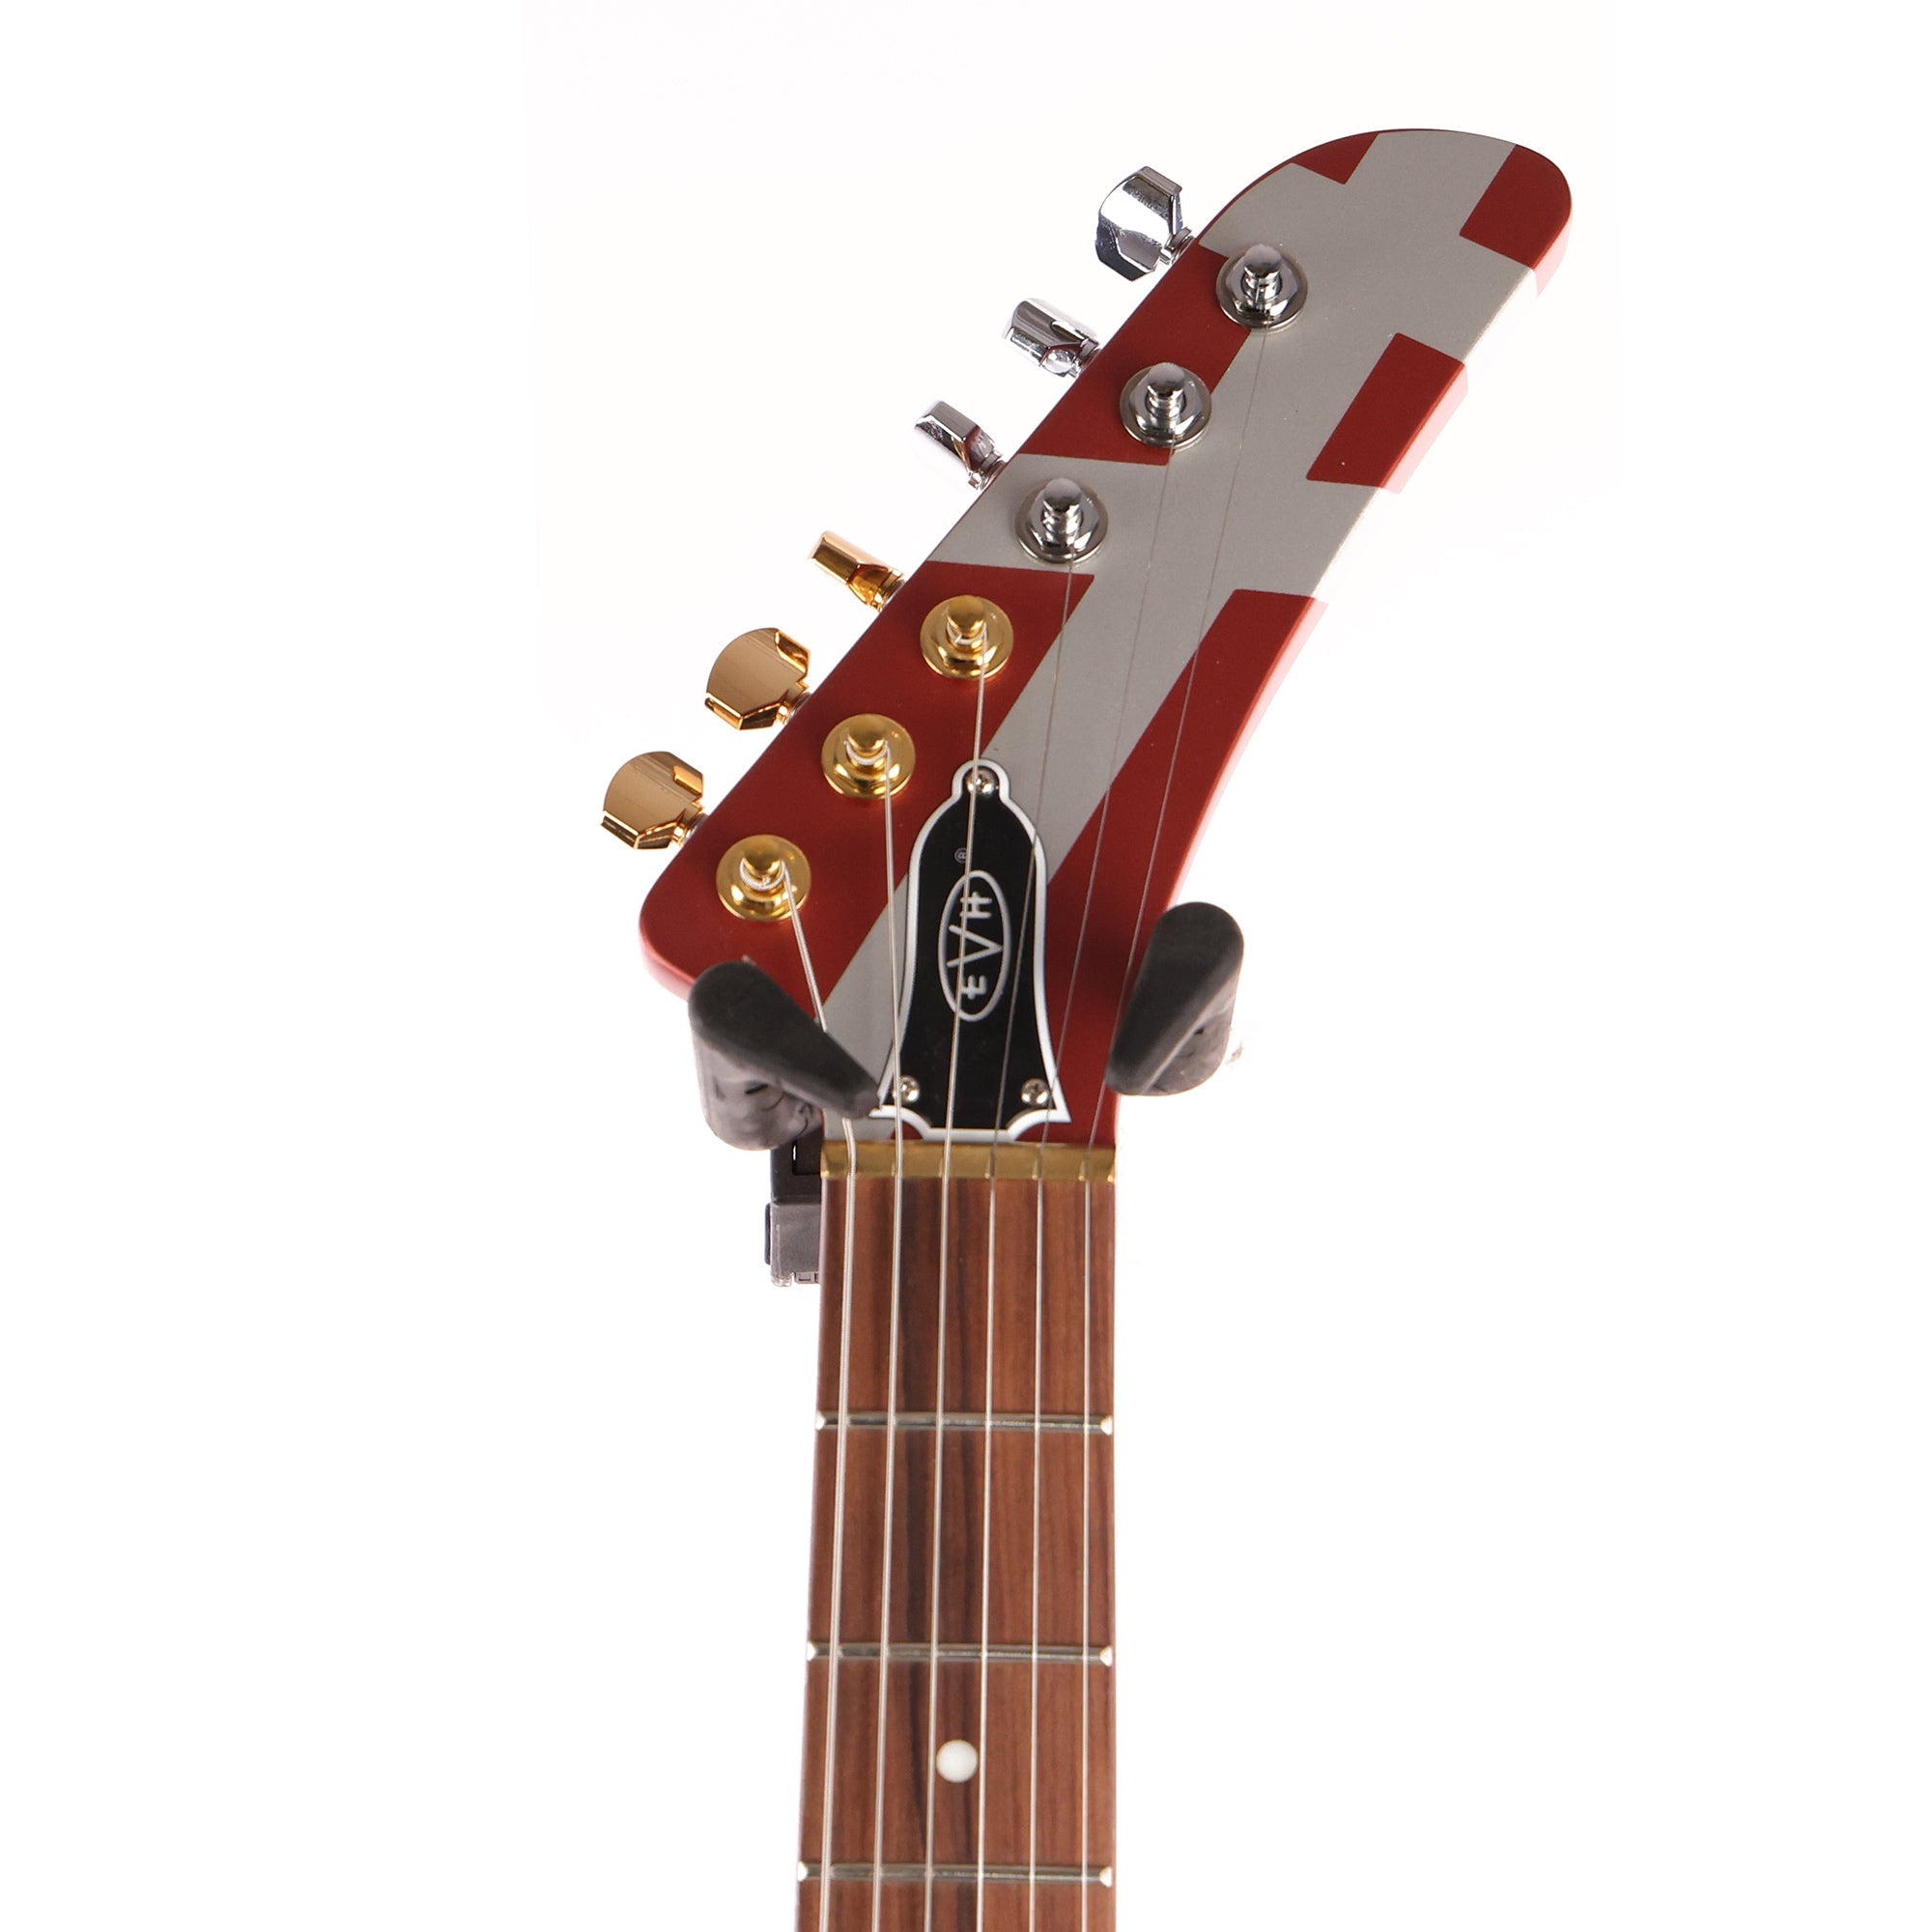 EVH Striped Series Shark Burgundy with Silver Stripes | The Music Zoo